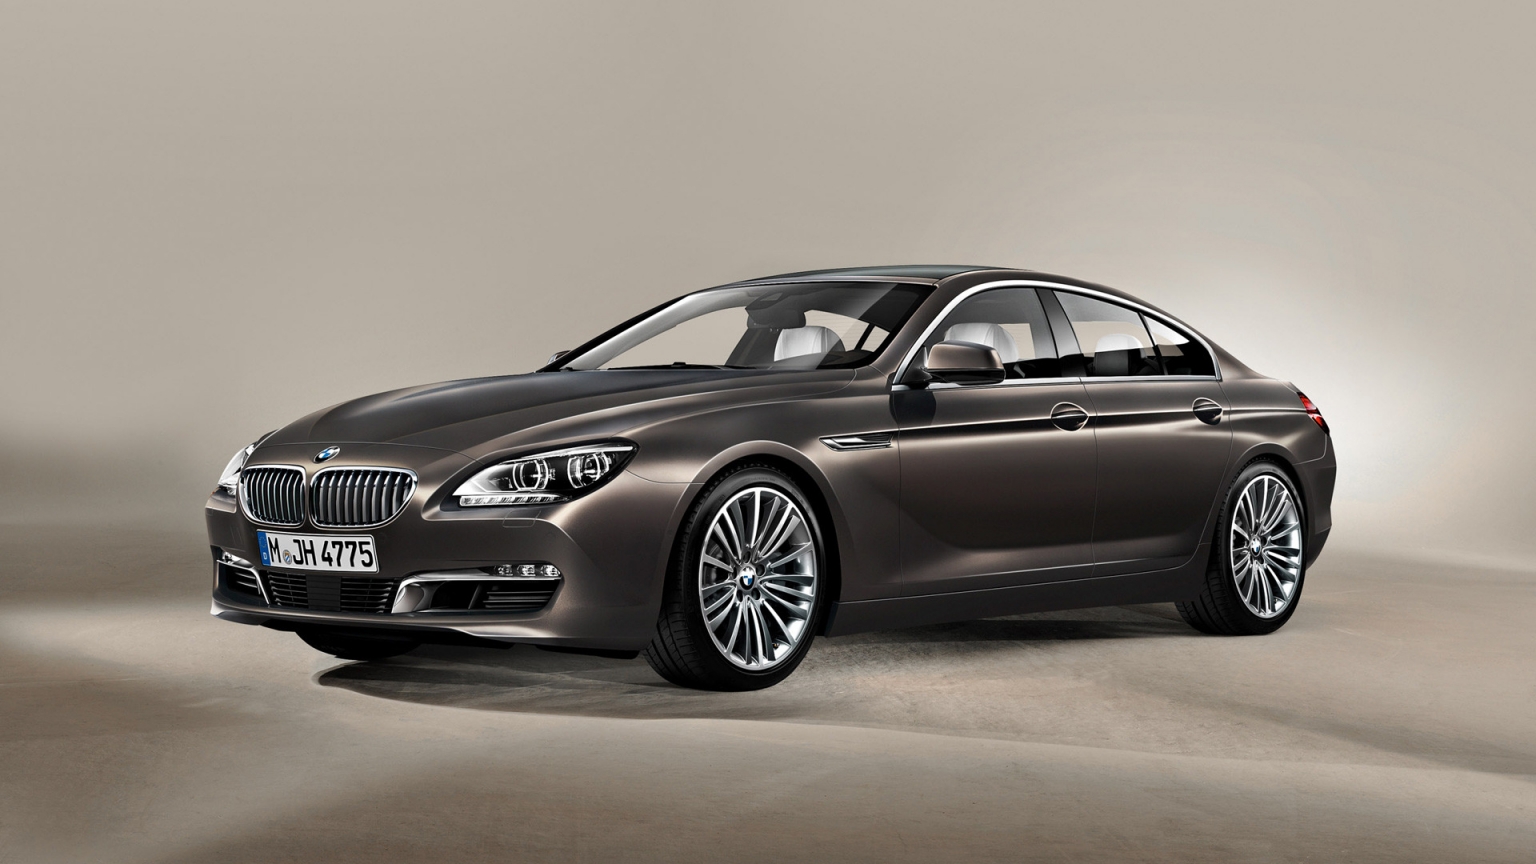 2013 BMW 6 Series Gran Coupe Studio for 1536 x 864 HDTV resolution